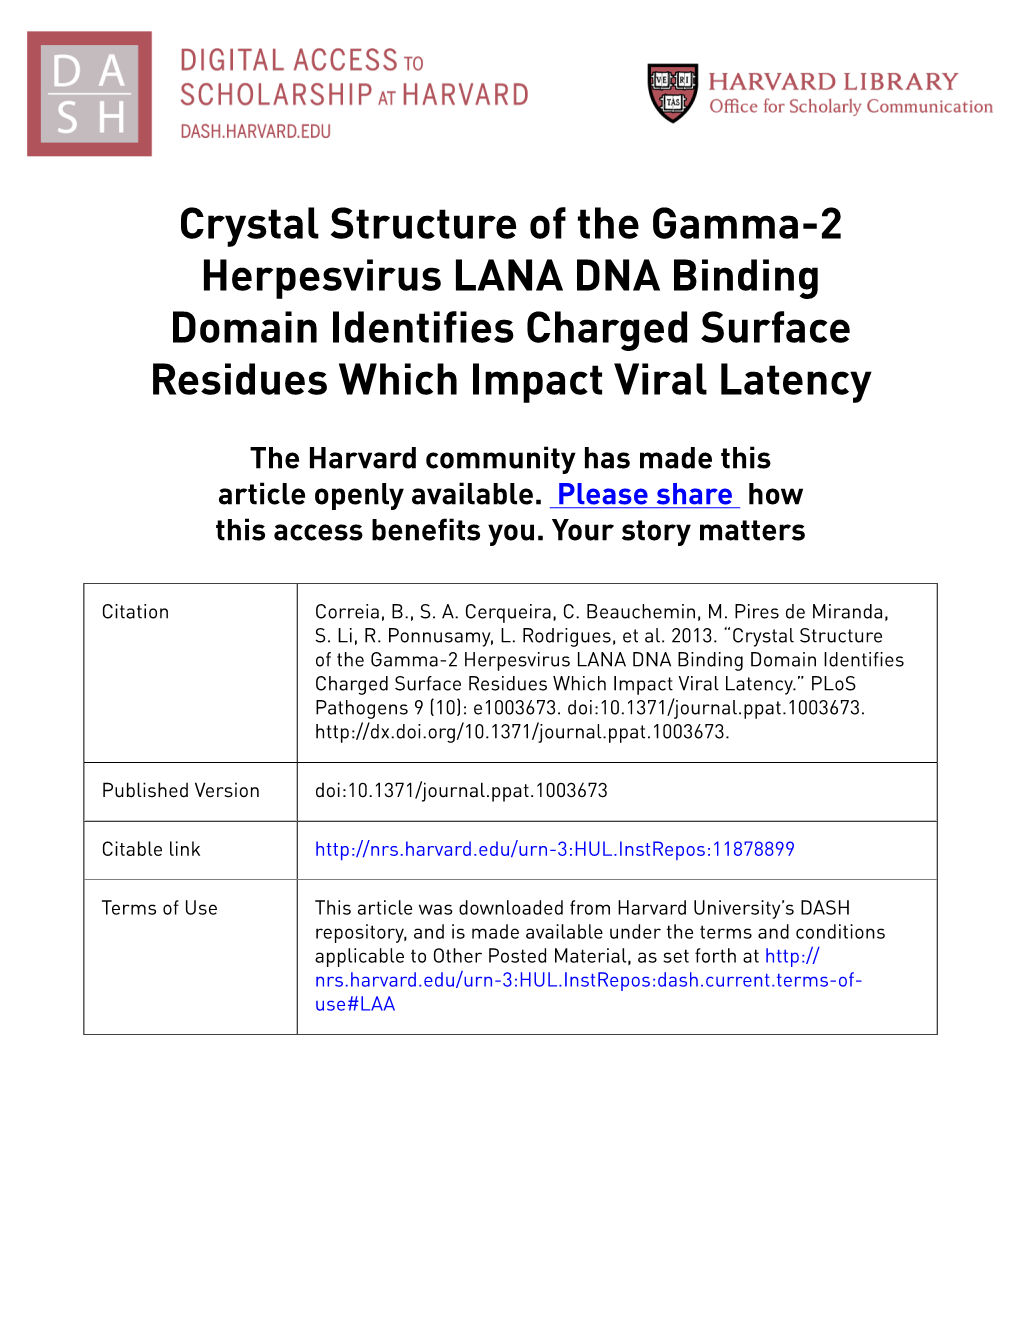 Crystal Structure of the Gamma-2 Herpesvirus LANA DNA Binding Domain Identifies Charged Surface Residues Which Impact Viral Latency